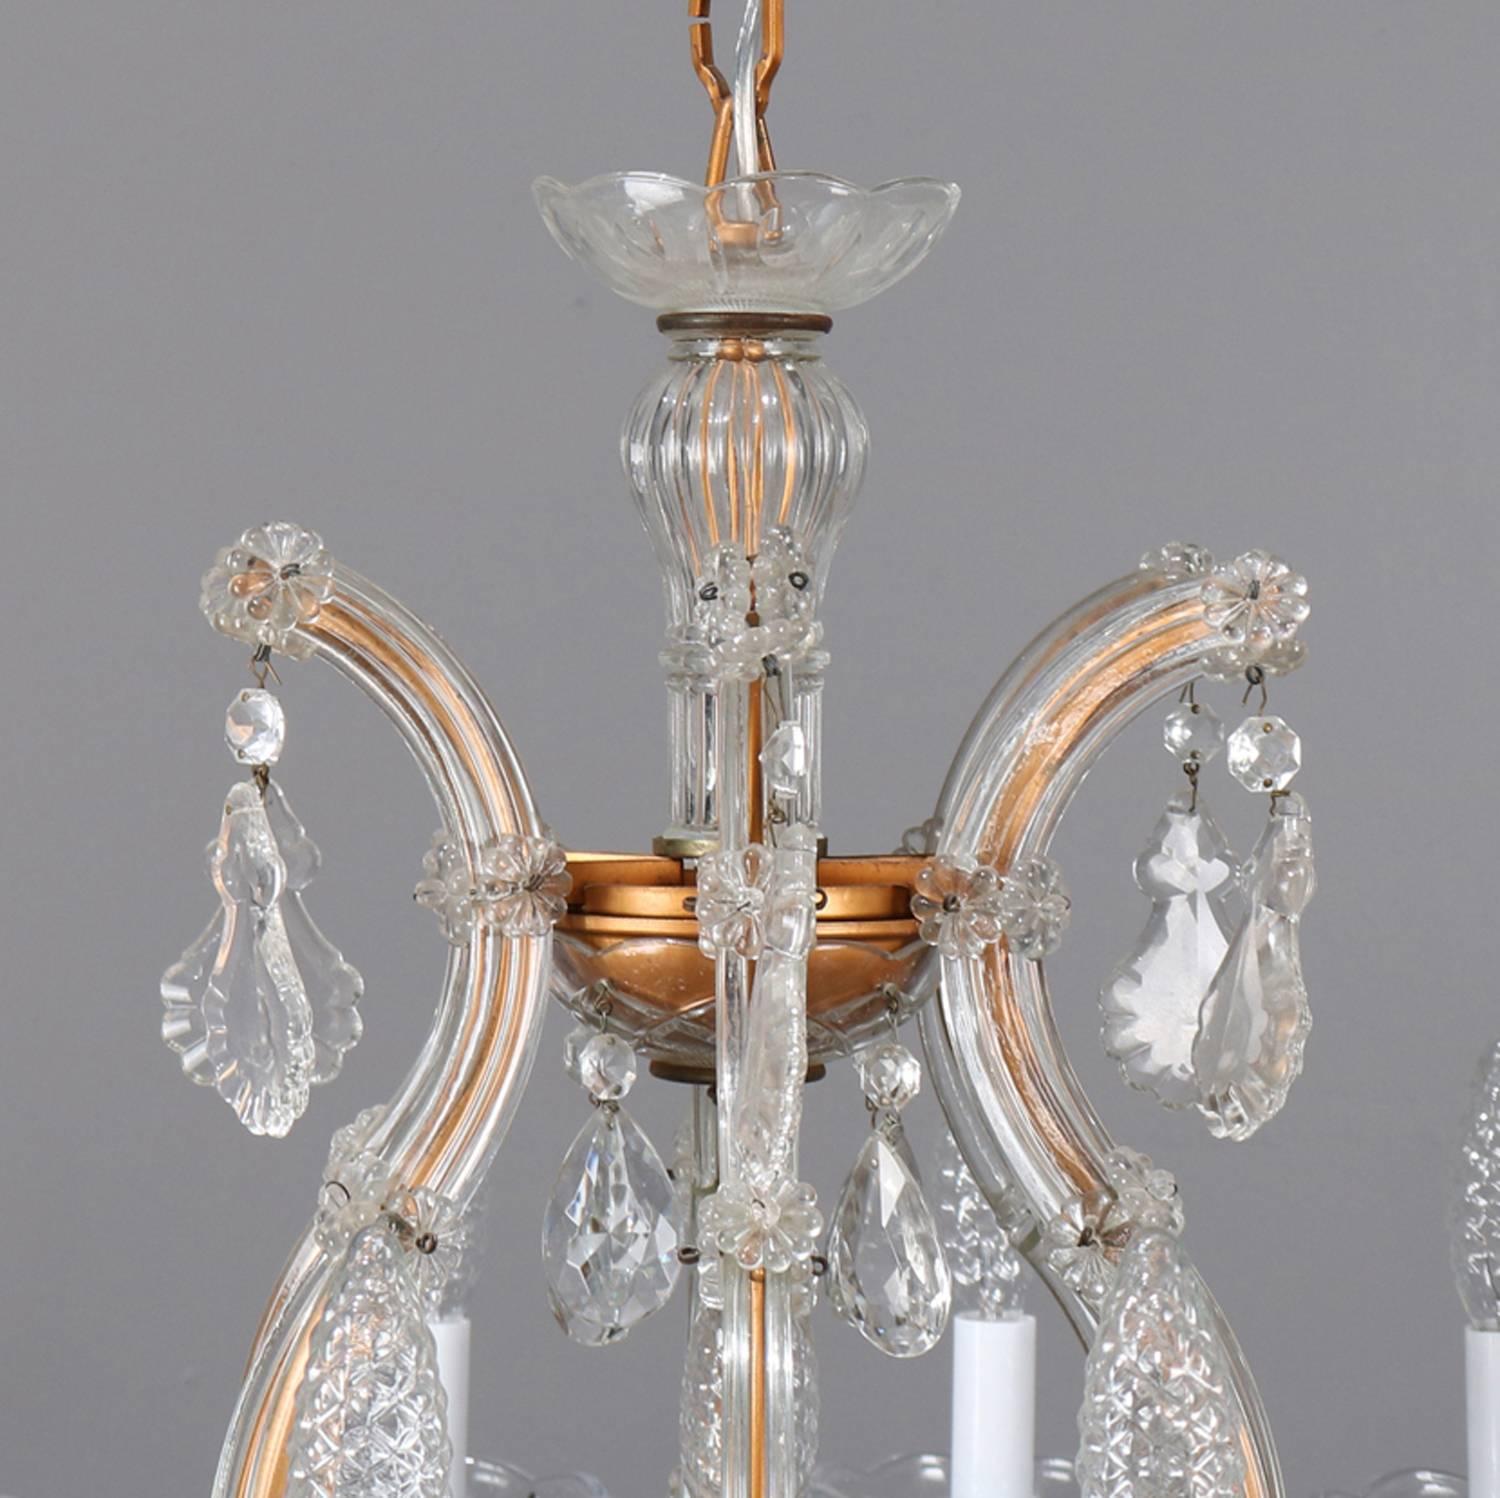 20th Century Italian Cut Rock Crystal Twelve-Light Branched and Scroll Form Prague Chandelier